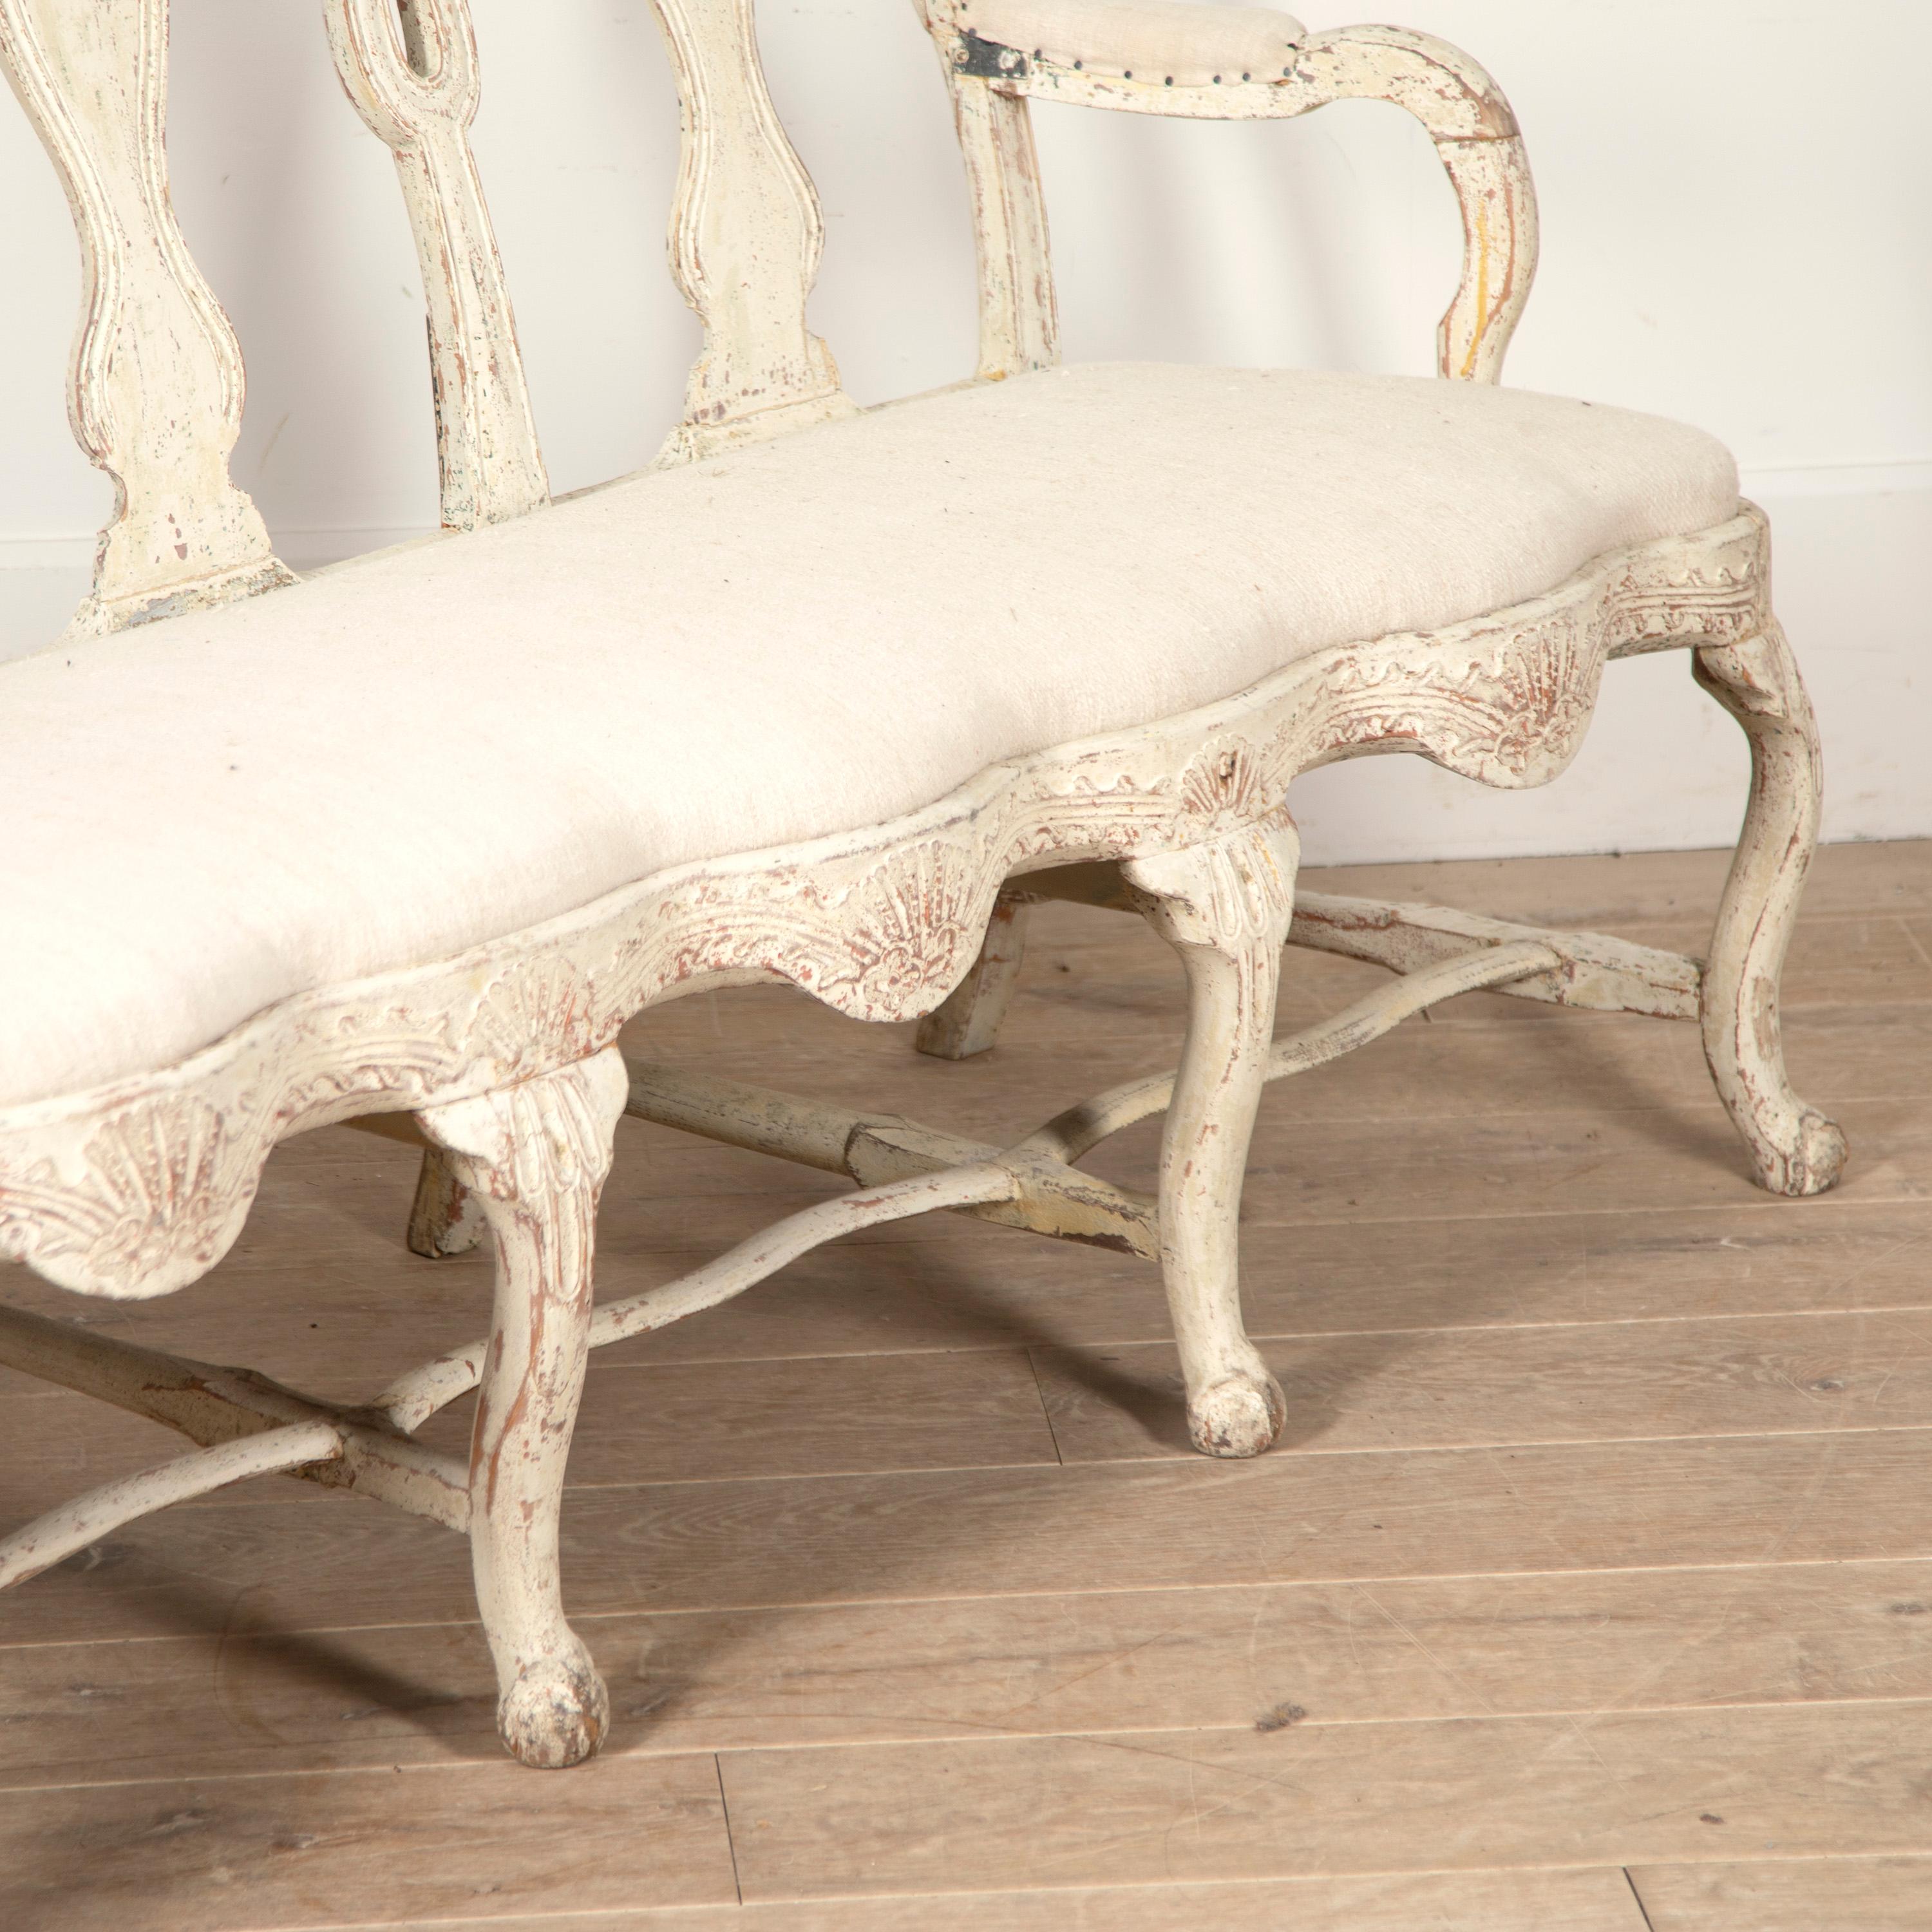 Late 18th Century Gustavian Sofa In Good Condition For Sale In Gloucestershire, GB